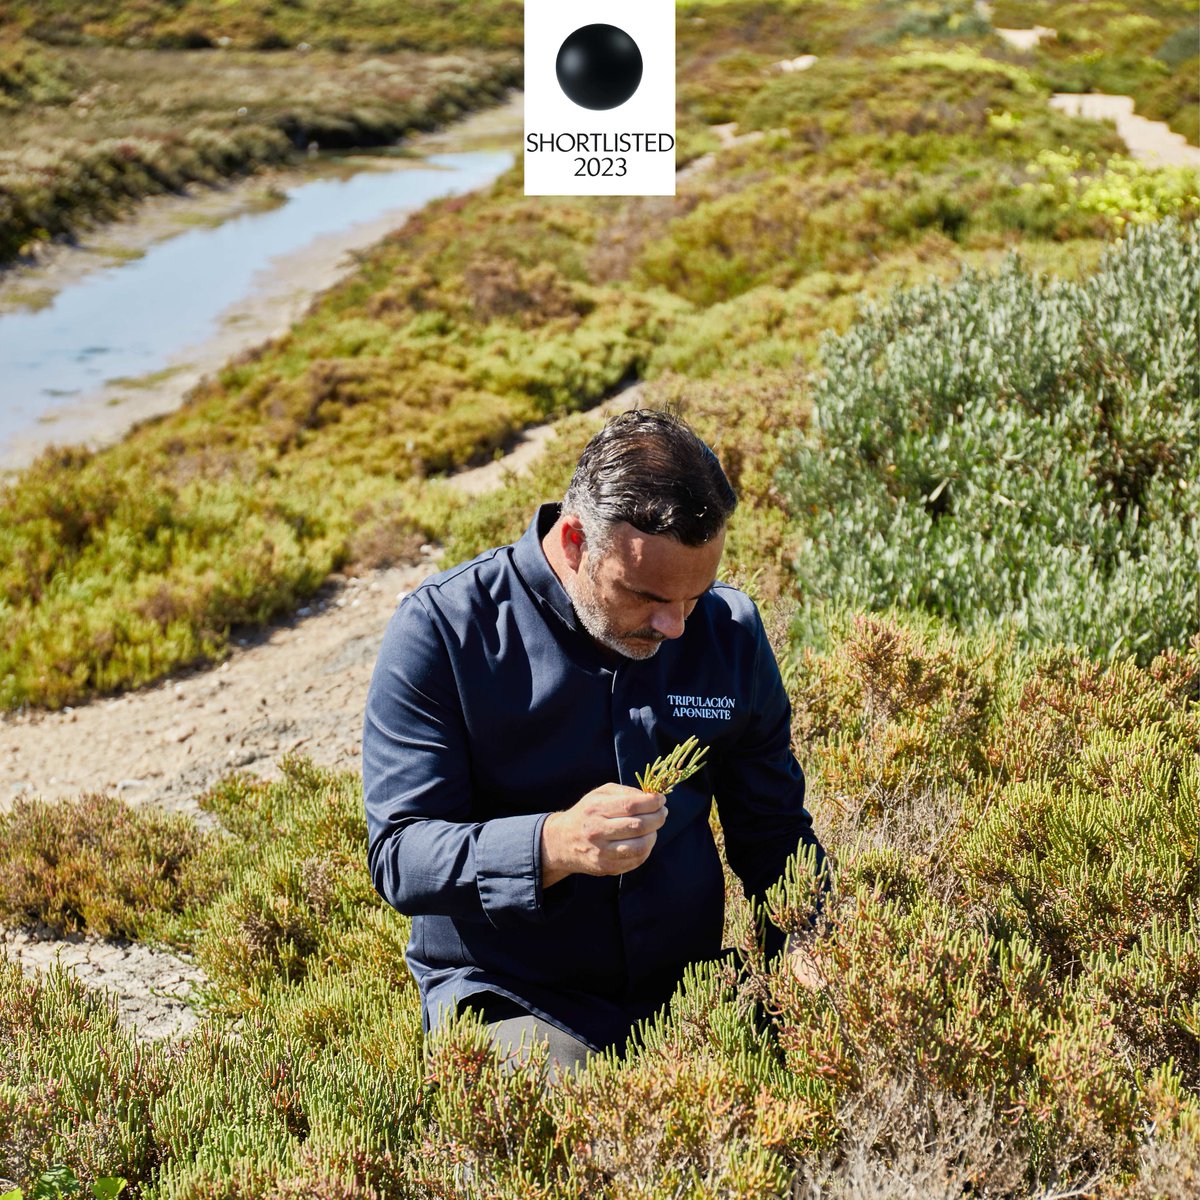 Presenting Food Planet Prize 2023 #Shortlist: Aponiente @chefdelmar is cultivating an edible #seagrain which can be cooked as rice, has more protein & fiber. It could help reduce #foodinsecurity. More: foodplanetprize.org/initiatives/ap… Text by @martamontojo Photos by @bea_janer